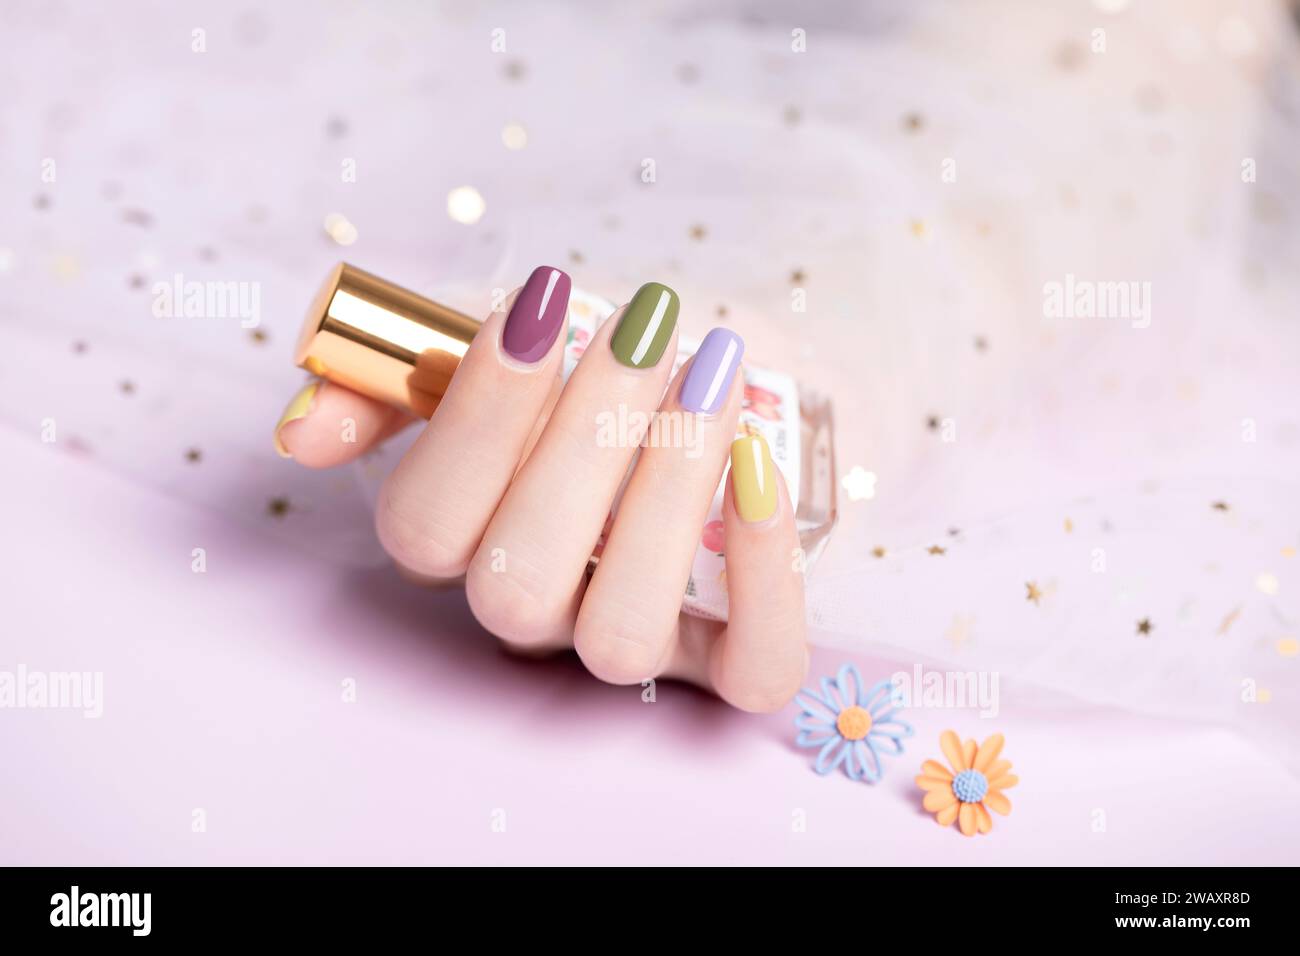 New images of nail beauty, nail care routine for healthy and happy nails, high quality images Stock Photo